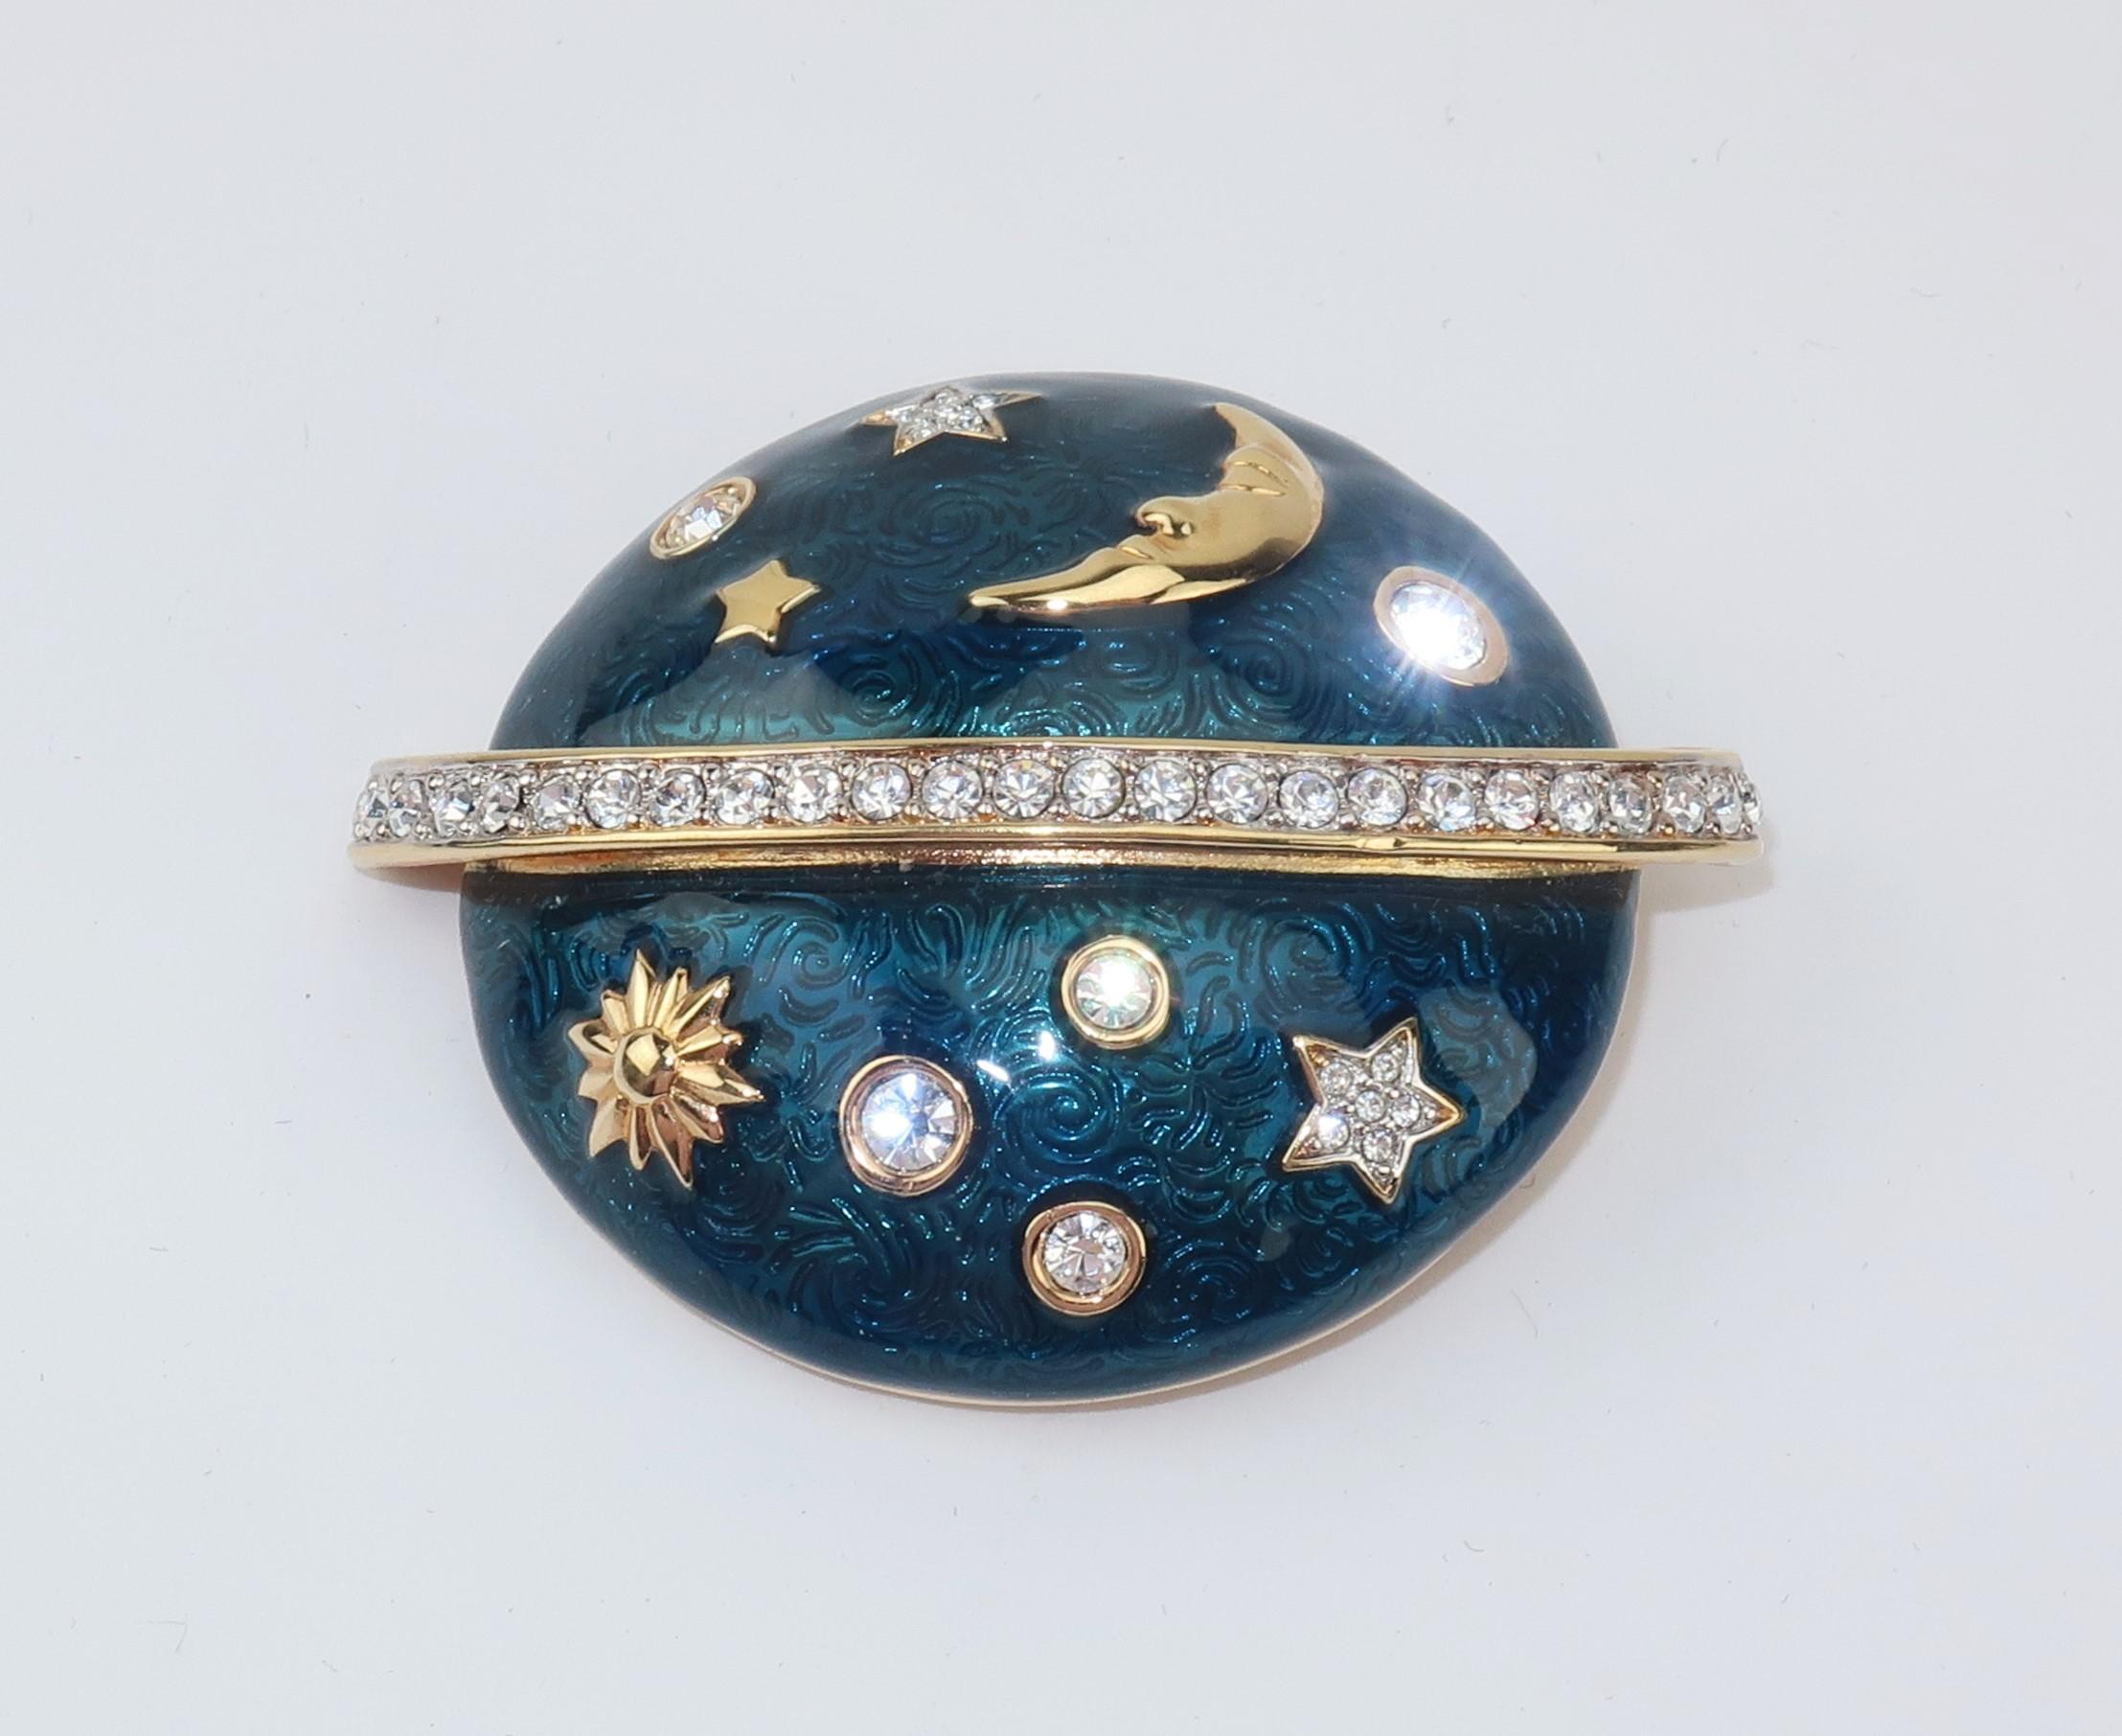 Aim for the stars and shoot for the moon!  This Swarovski crystal rhinestone encrusted brooch has gold tone stars, moons, planets and suns decorating a royal blue enamel Saturn shaped orb.  Beautifully made with attention to details including cut